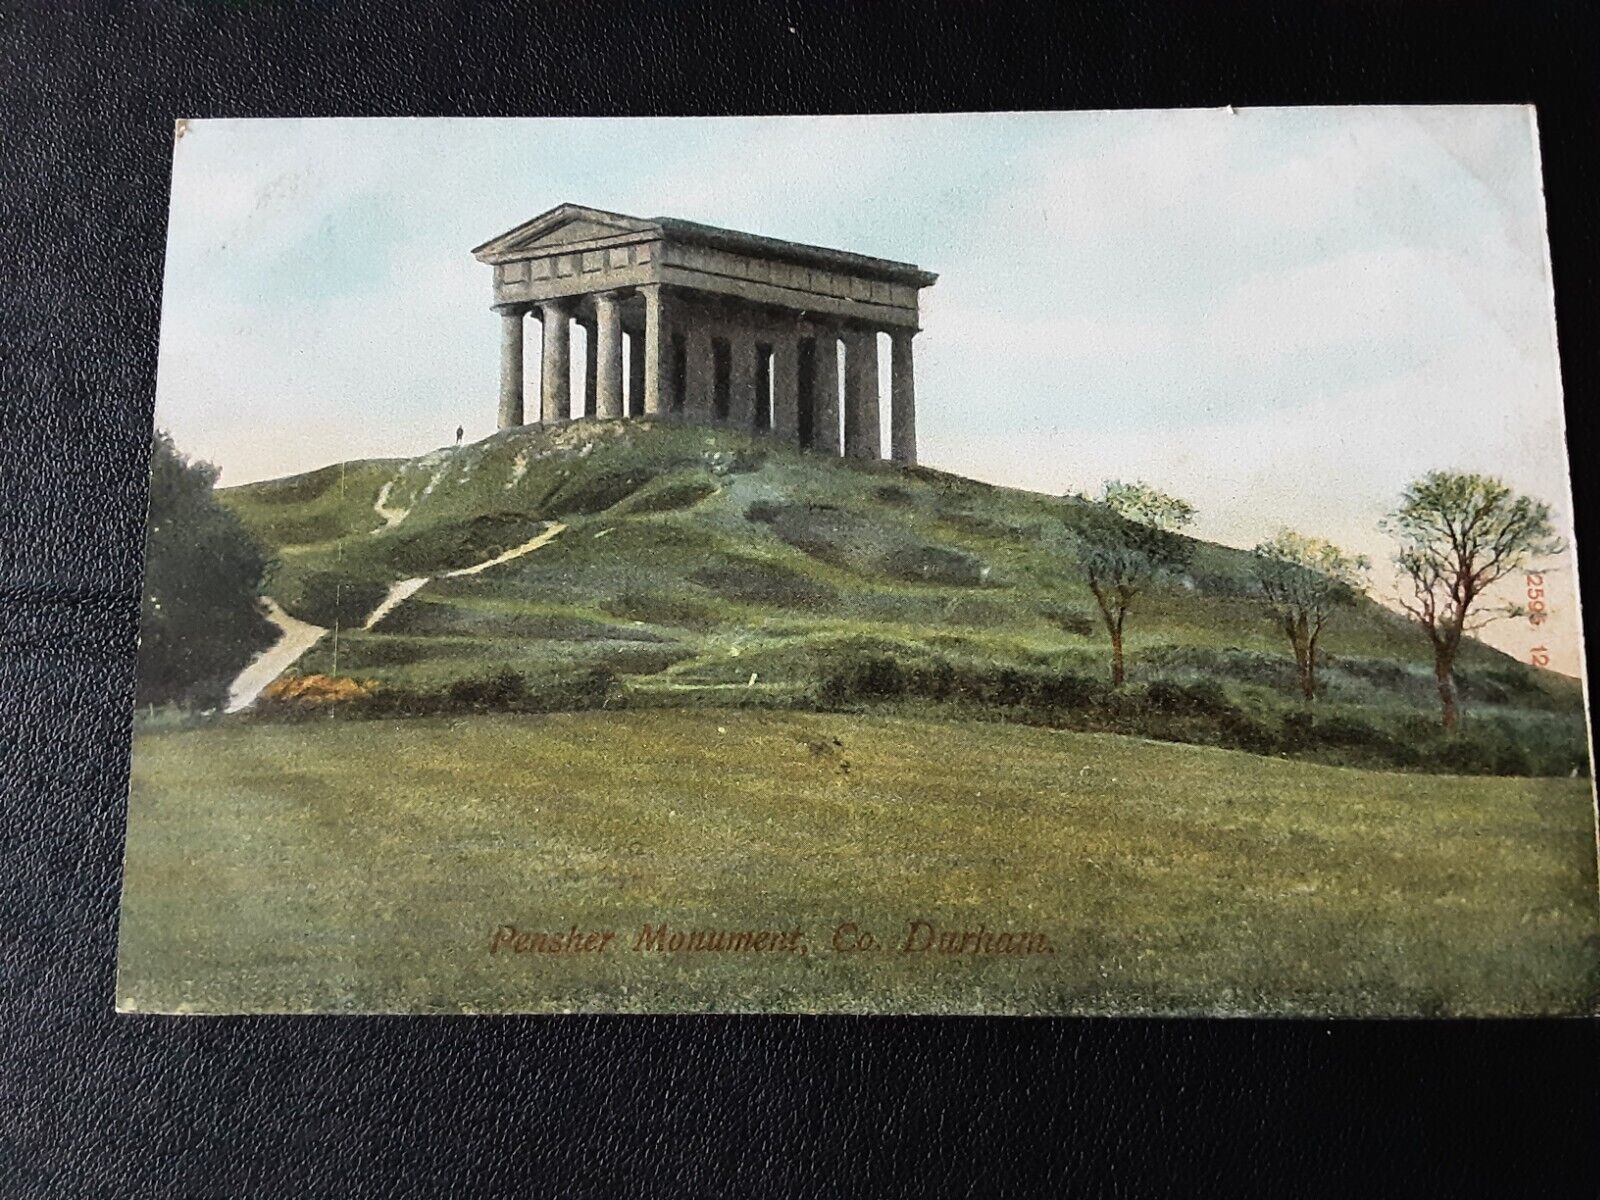 House Clearance - Old Hartmann service of Pensher / Penshaw Monument, County Durham